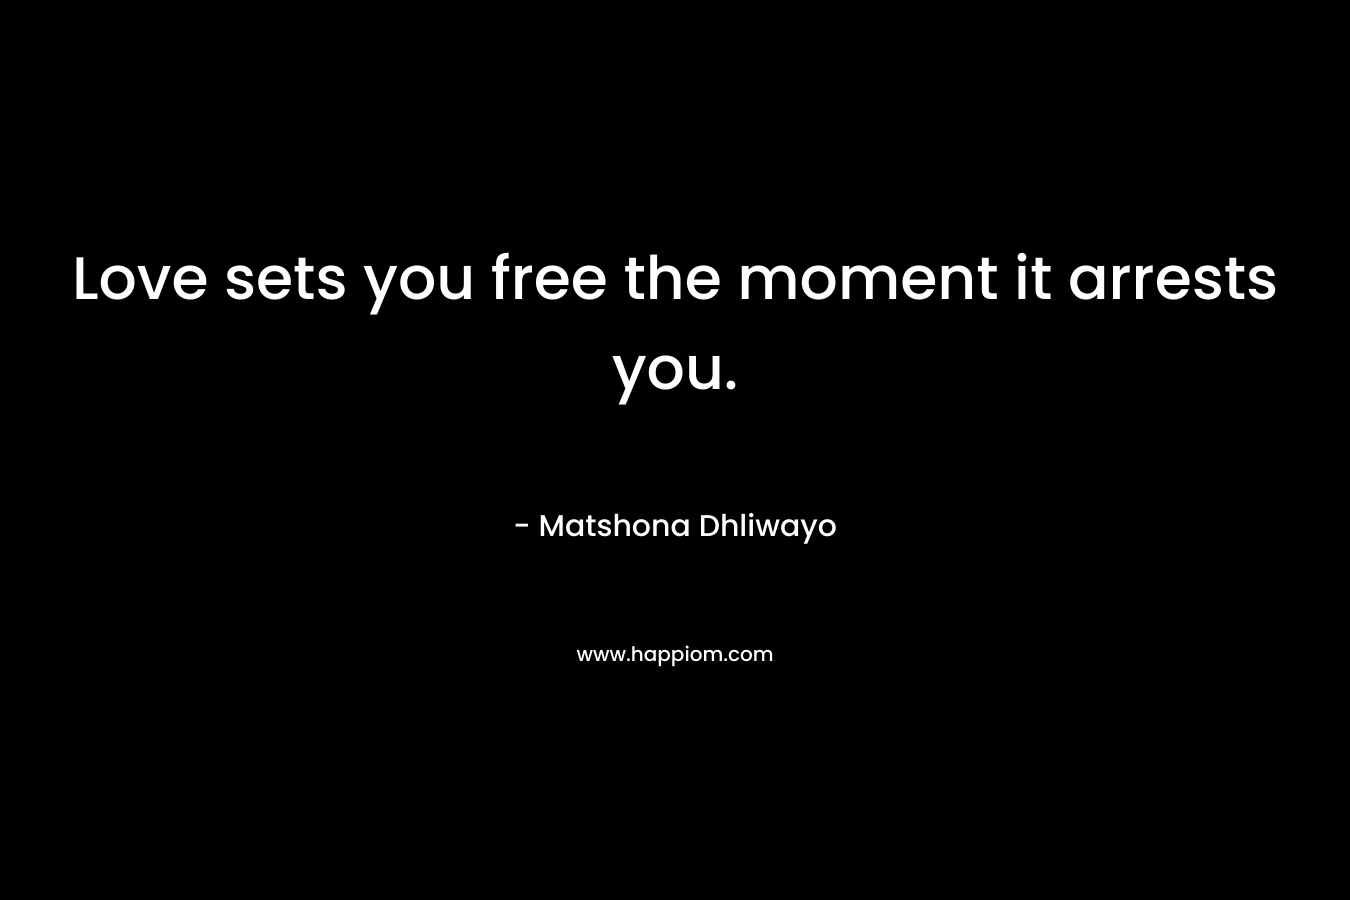 Love sets you free the moment it arrests you.